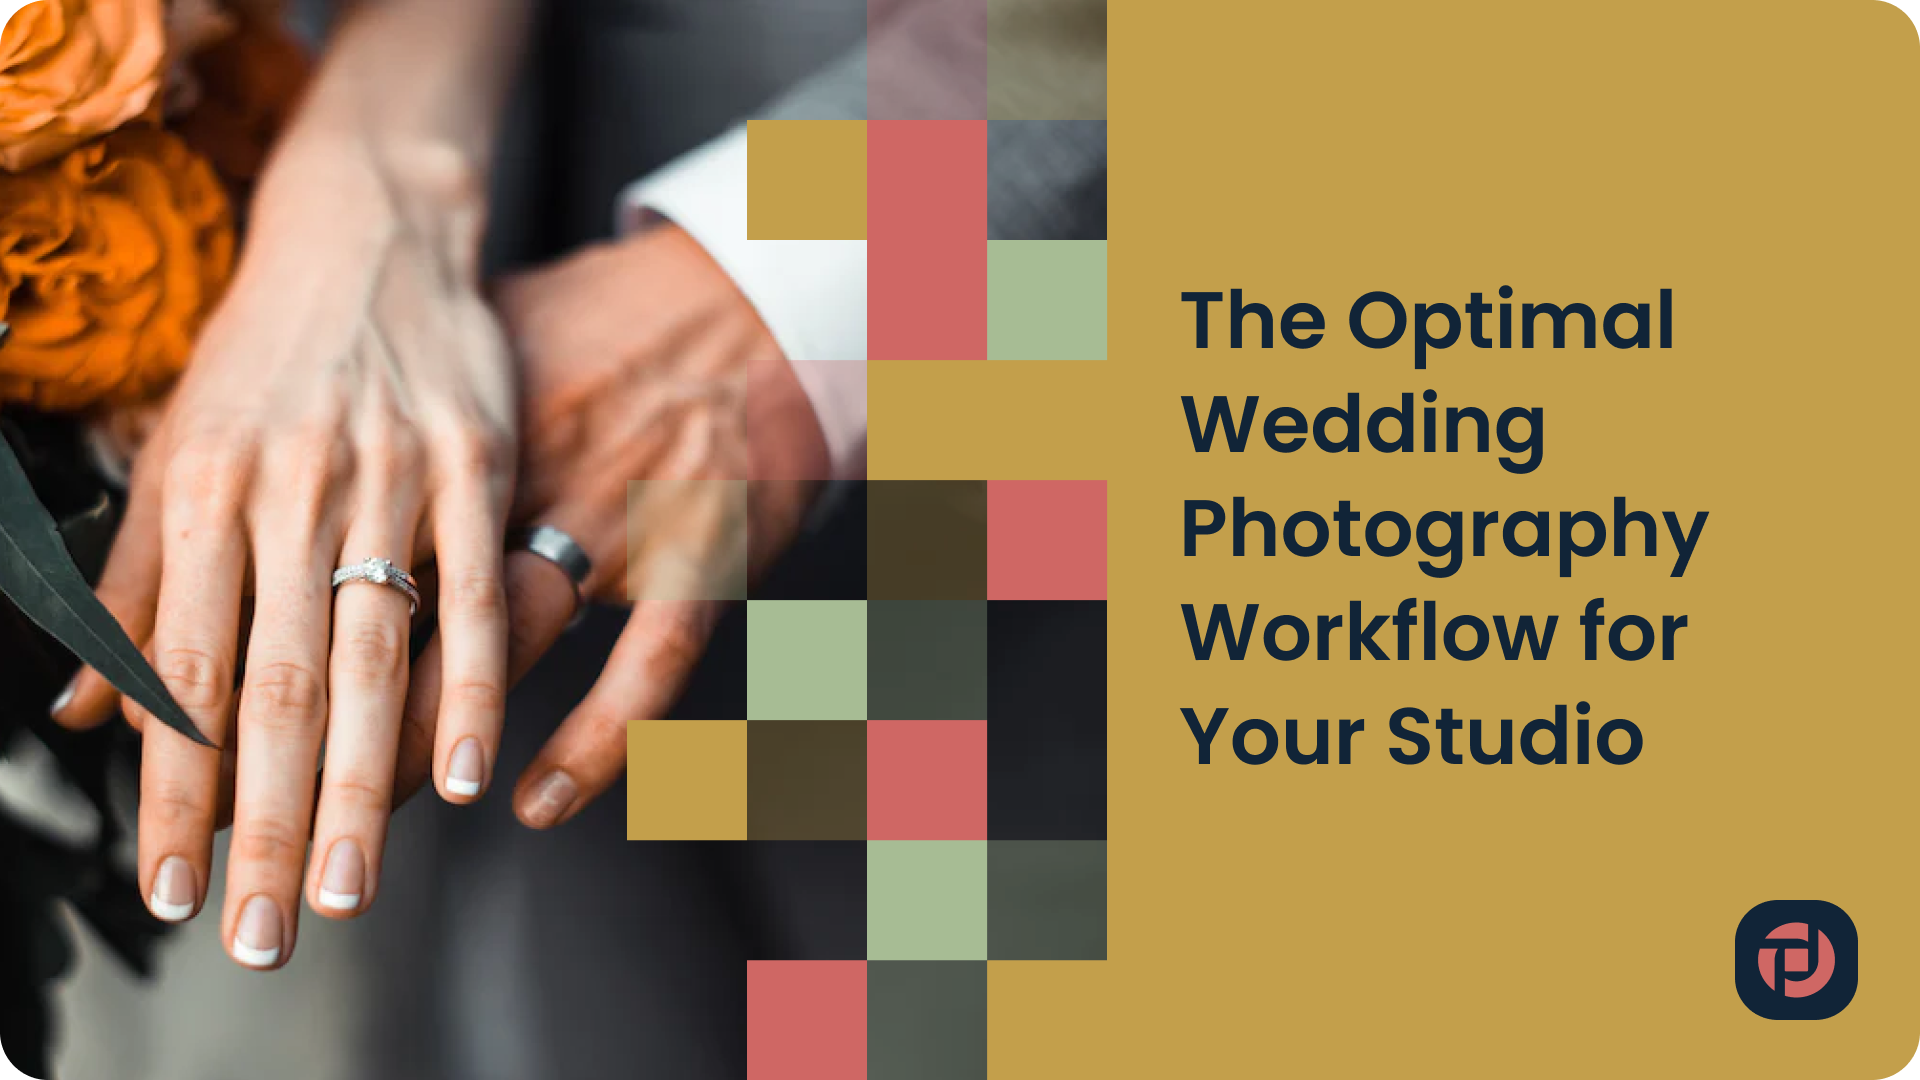 The Optimal Wedding Photography Workflow for Your Studio